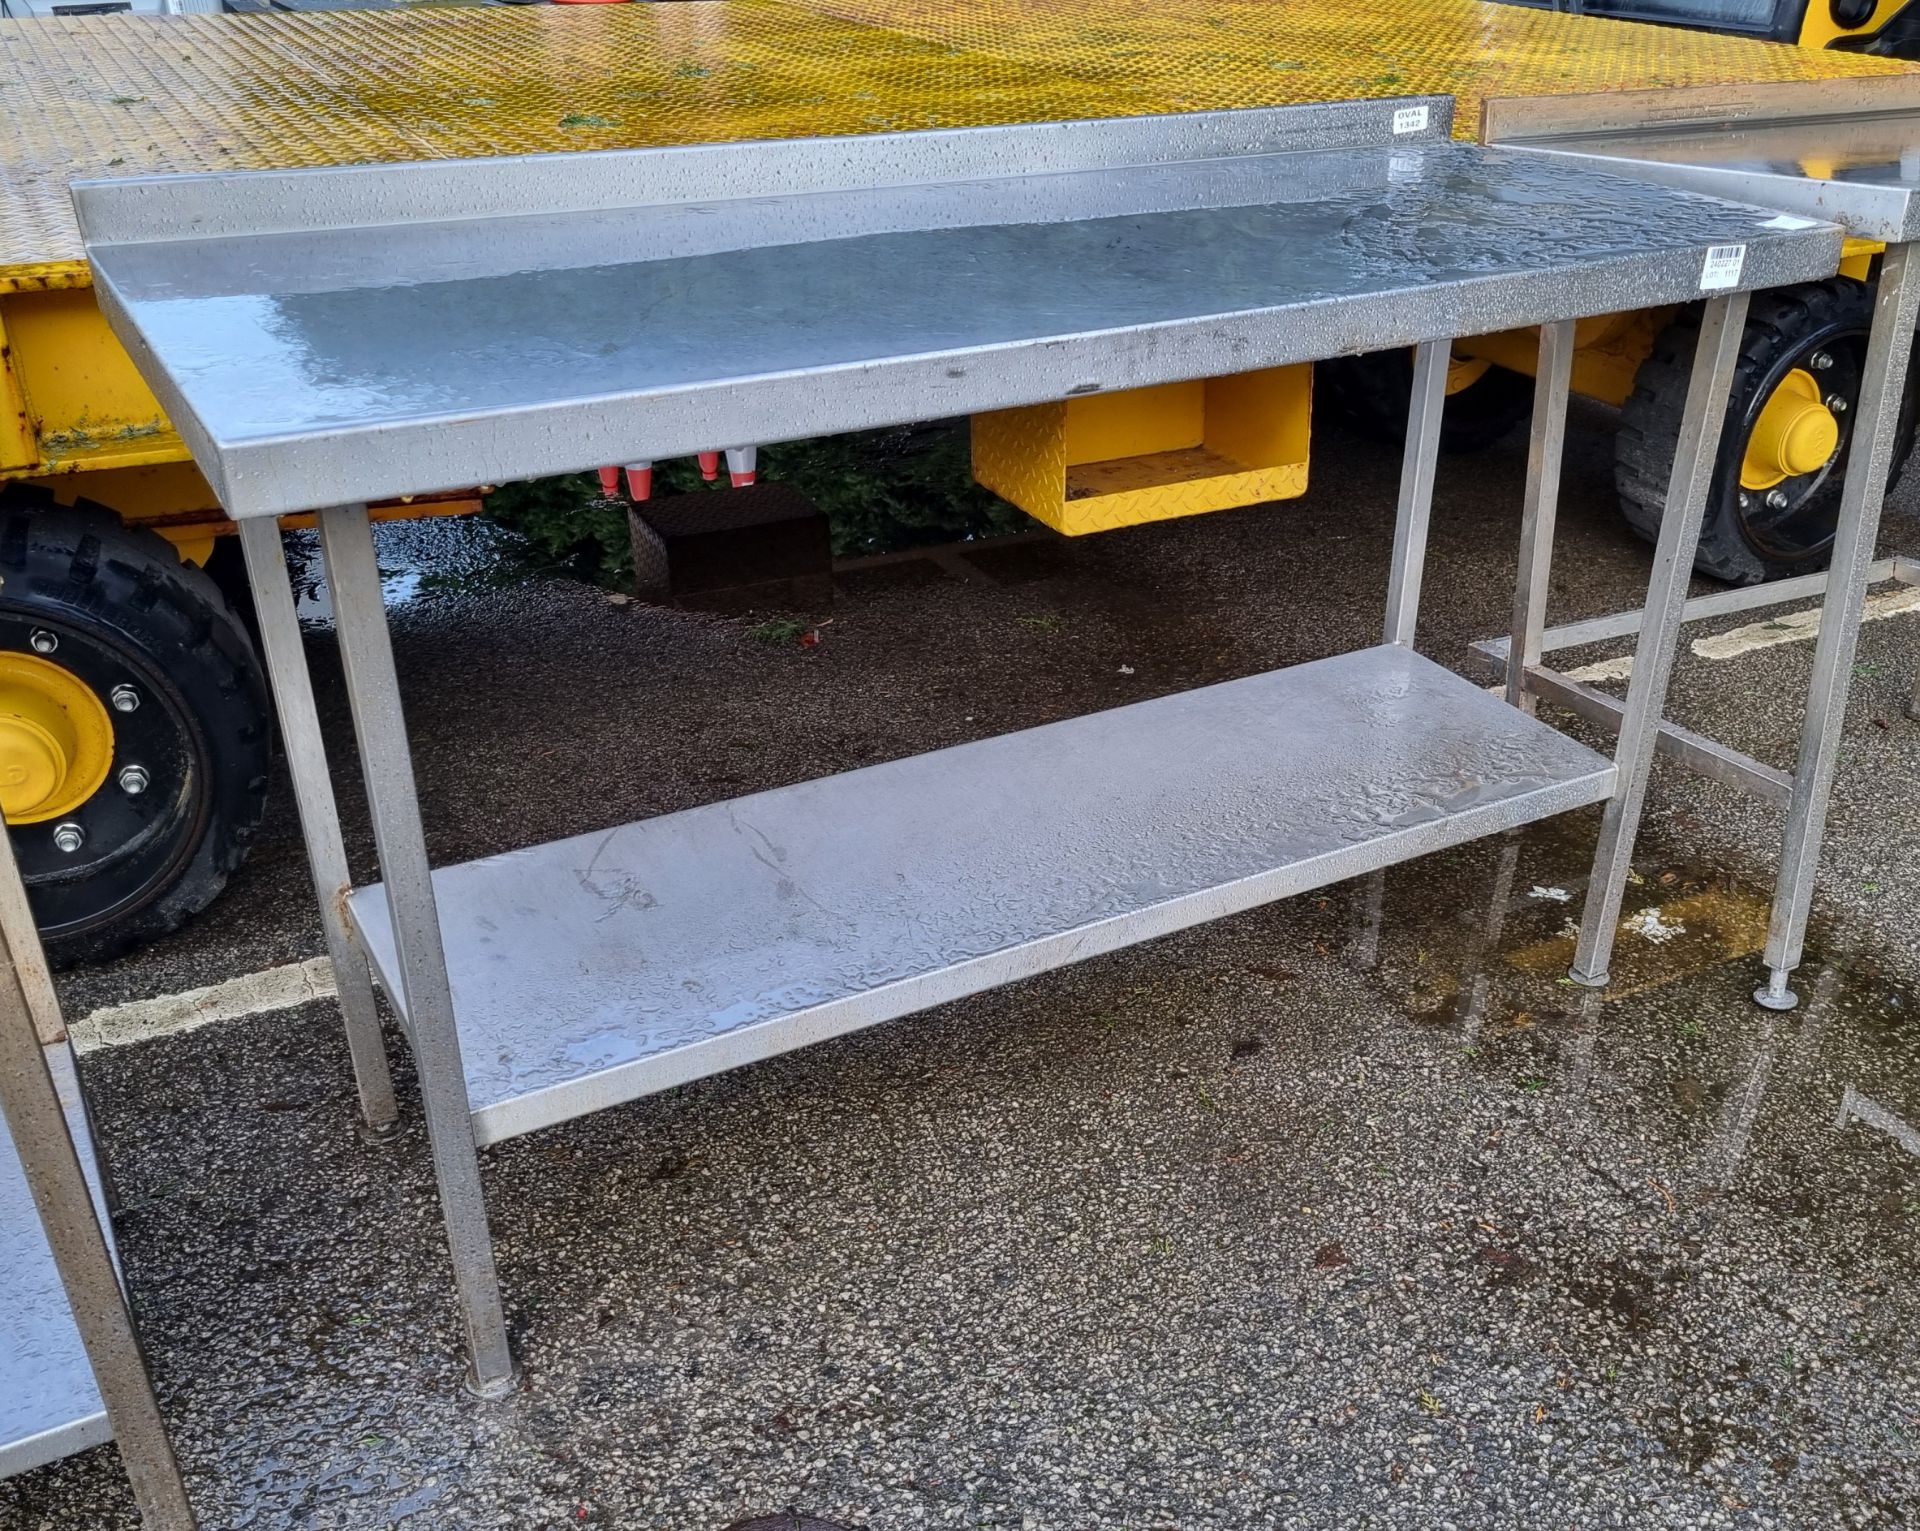 Stainless steel preparation table with splashback - L 1500 x W 600 x H 940mm - Image 3 of 3